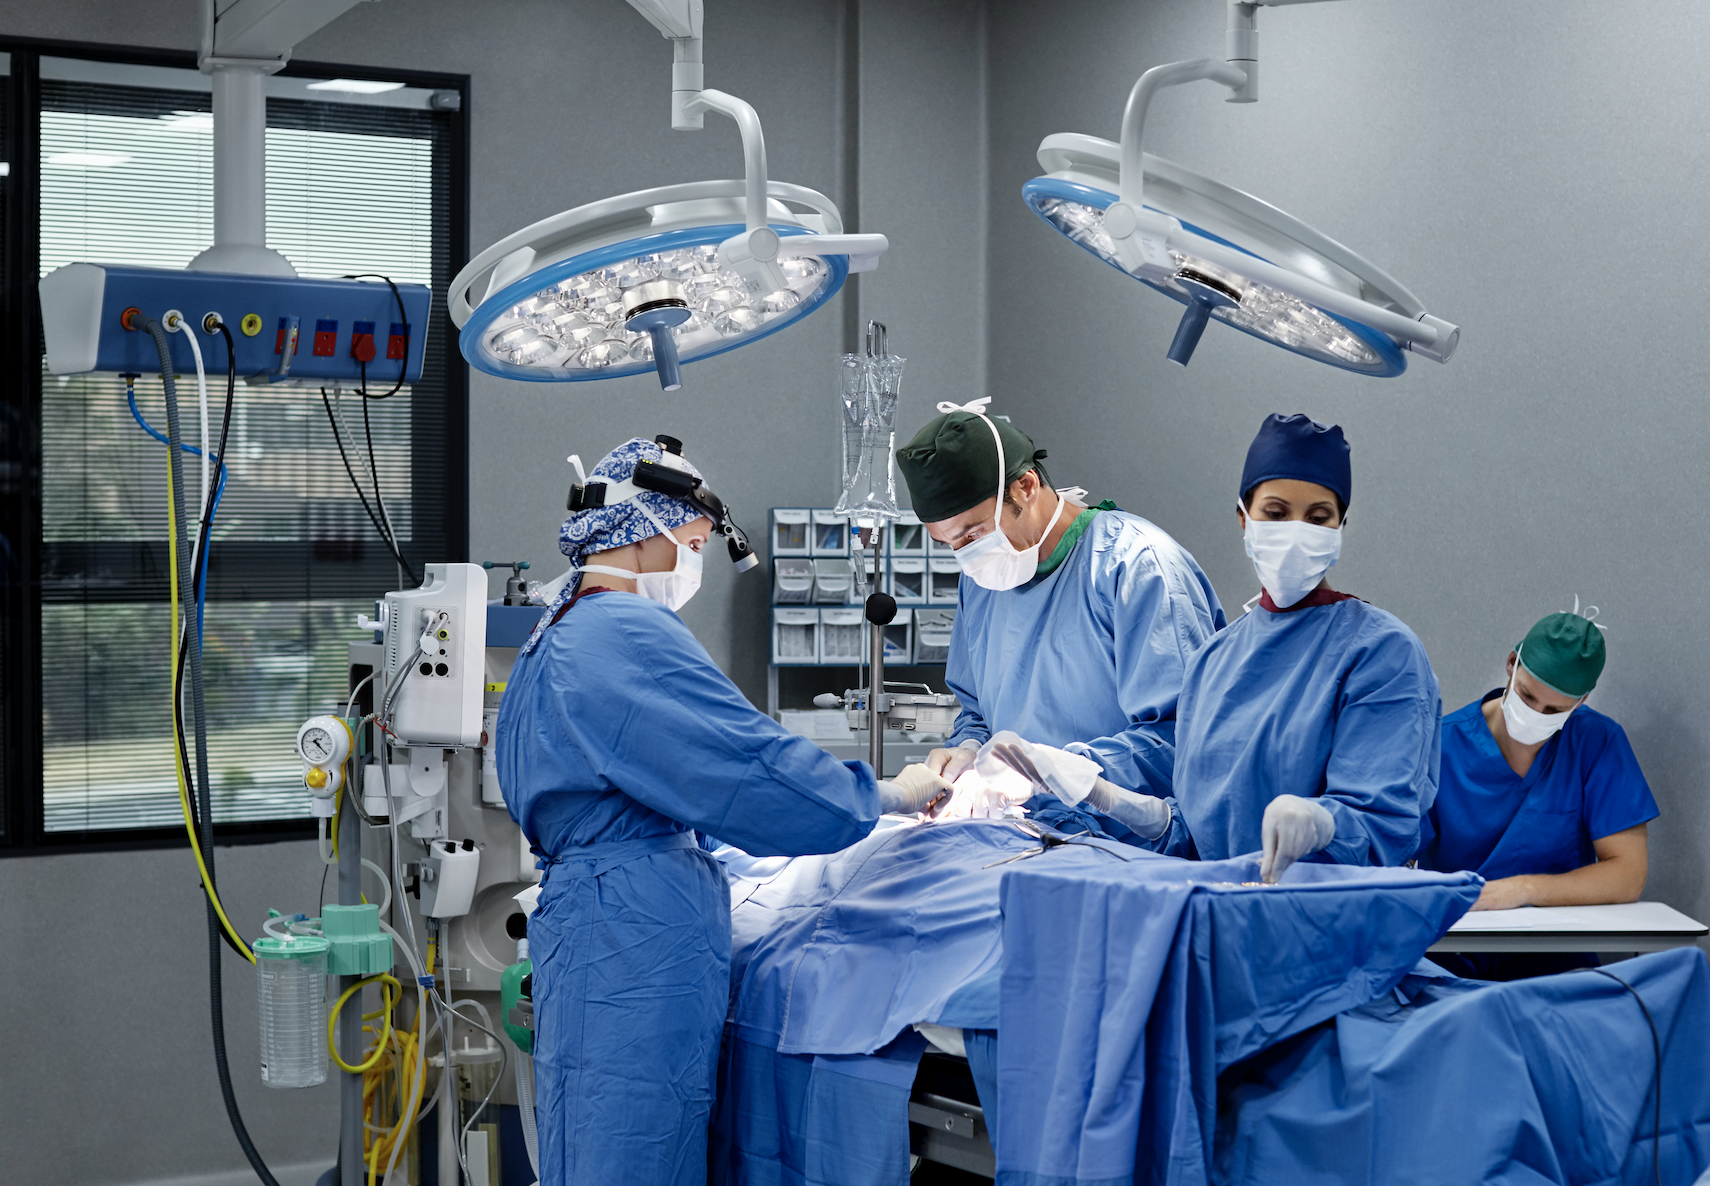 Medical team performing surgery in an operating room